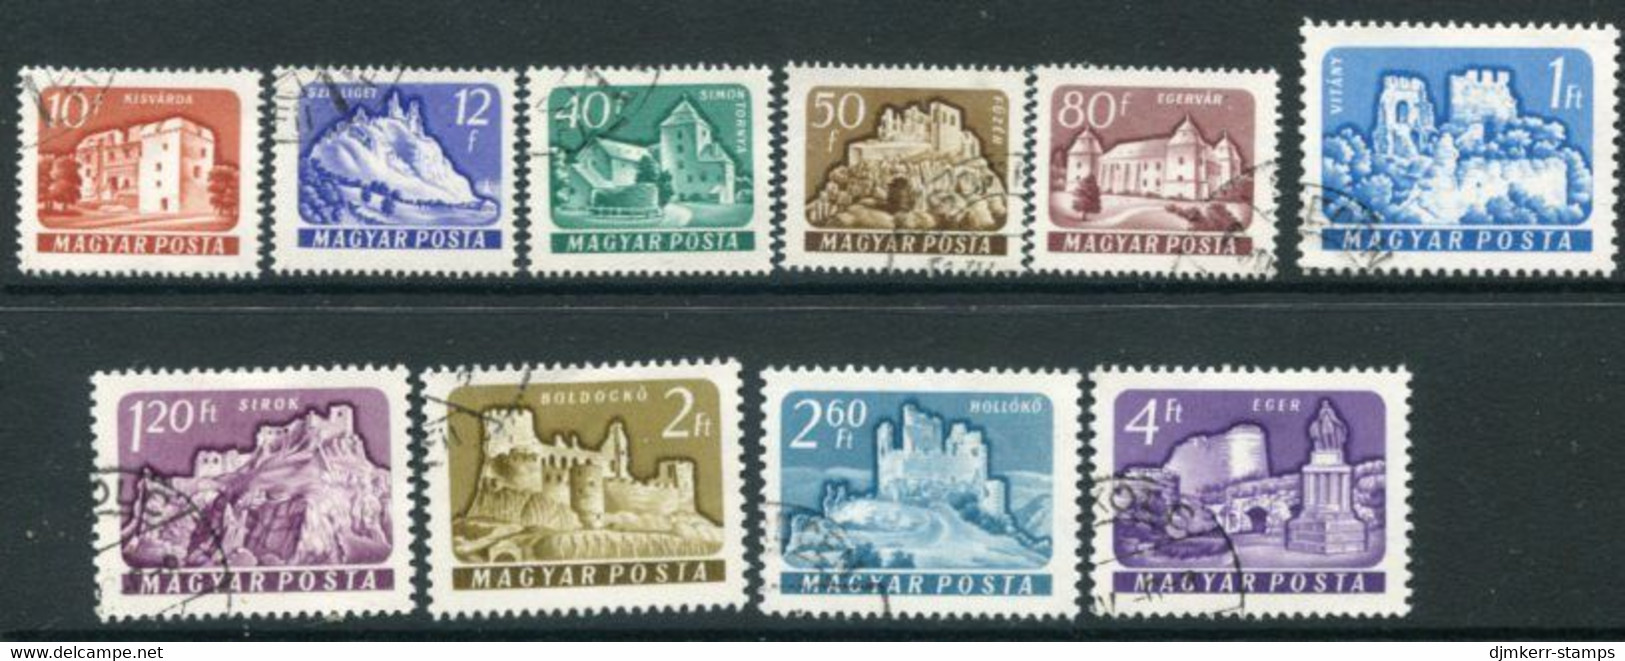 HUNGARY 1961 Castles Definitive Used.  Michel 1737-46 - Gebraucht